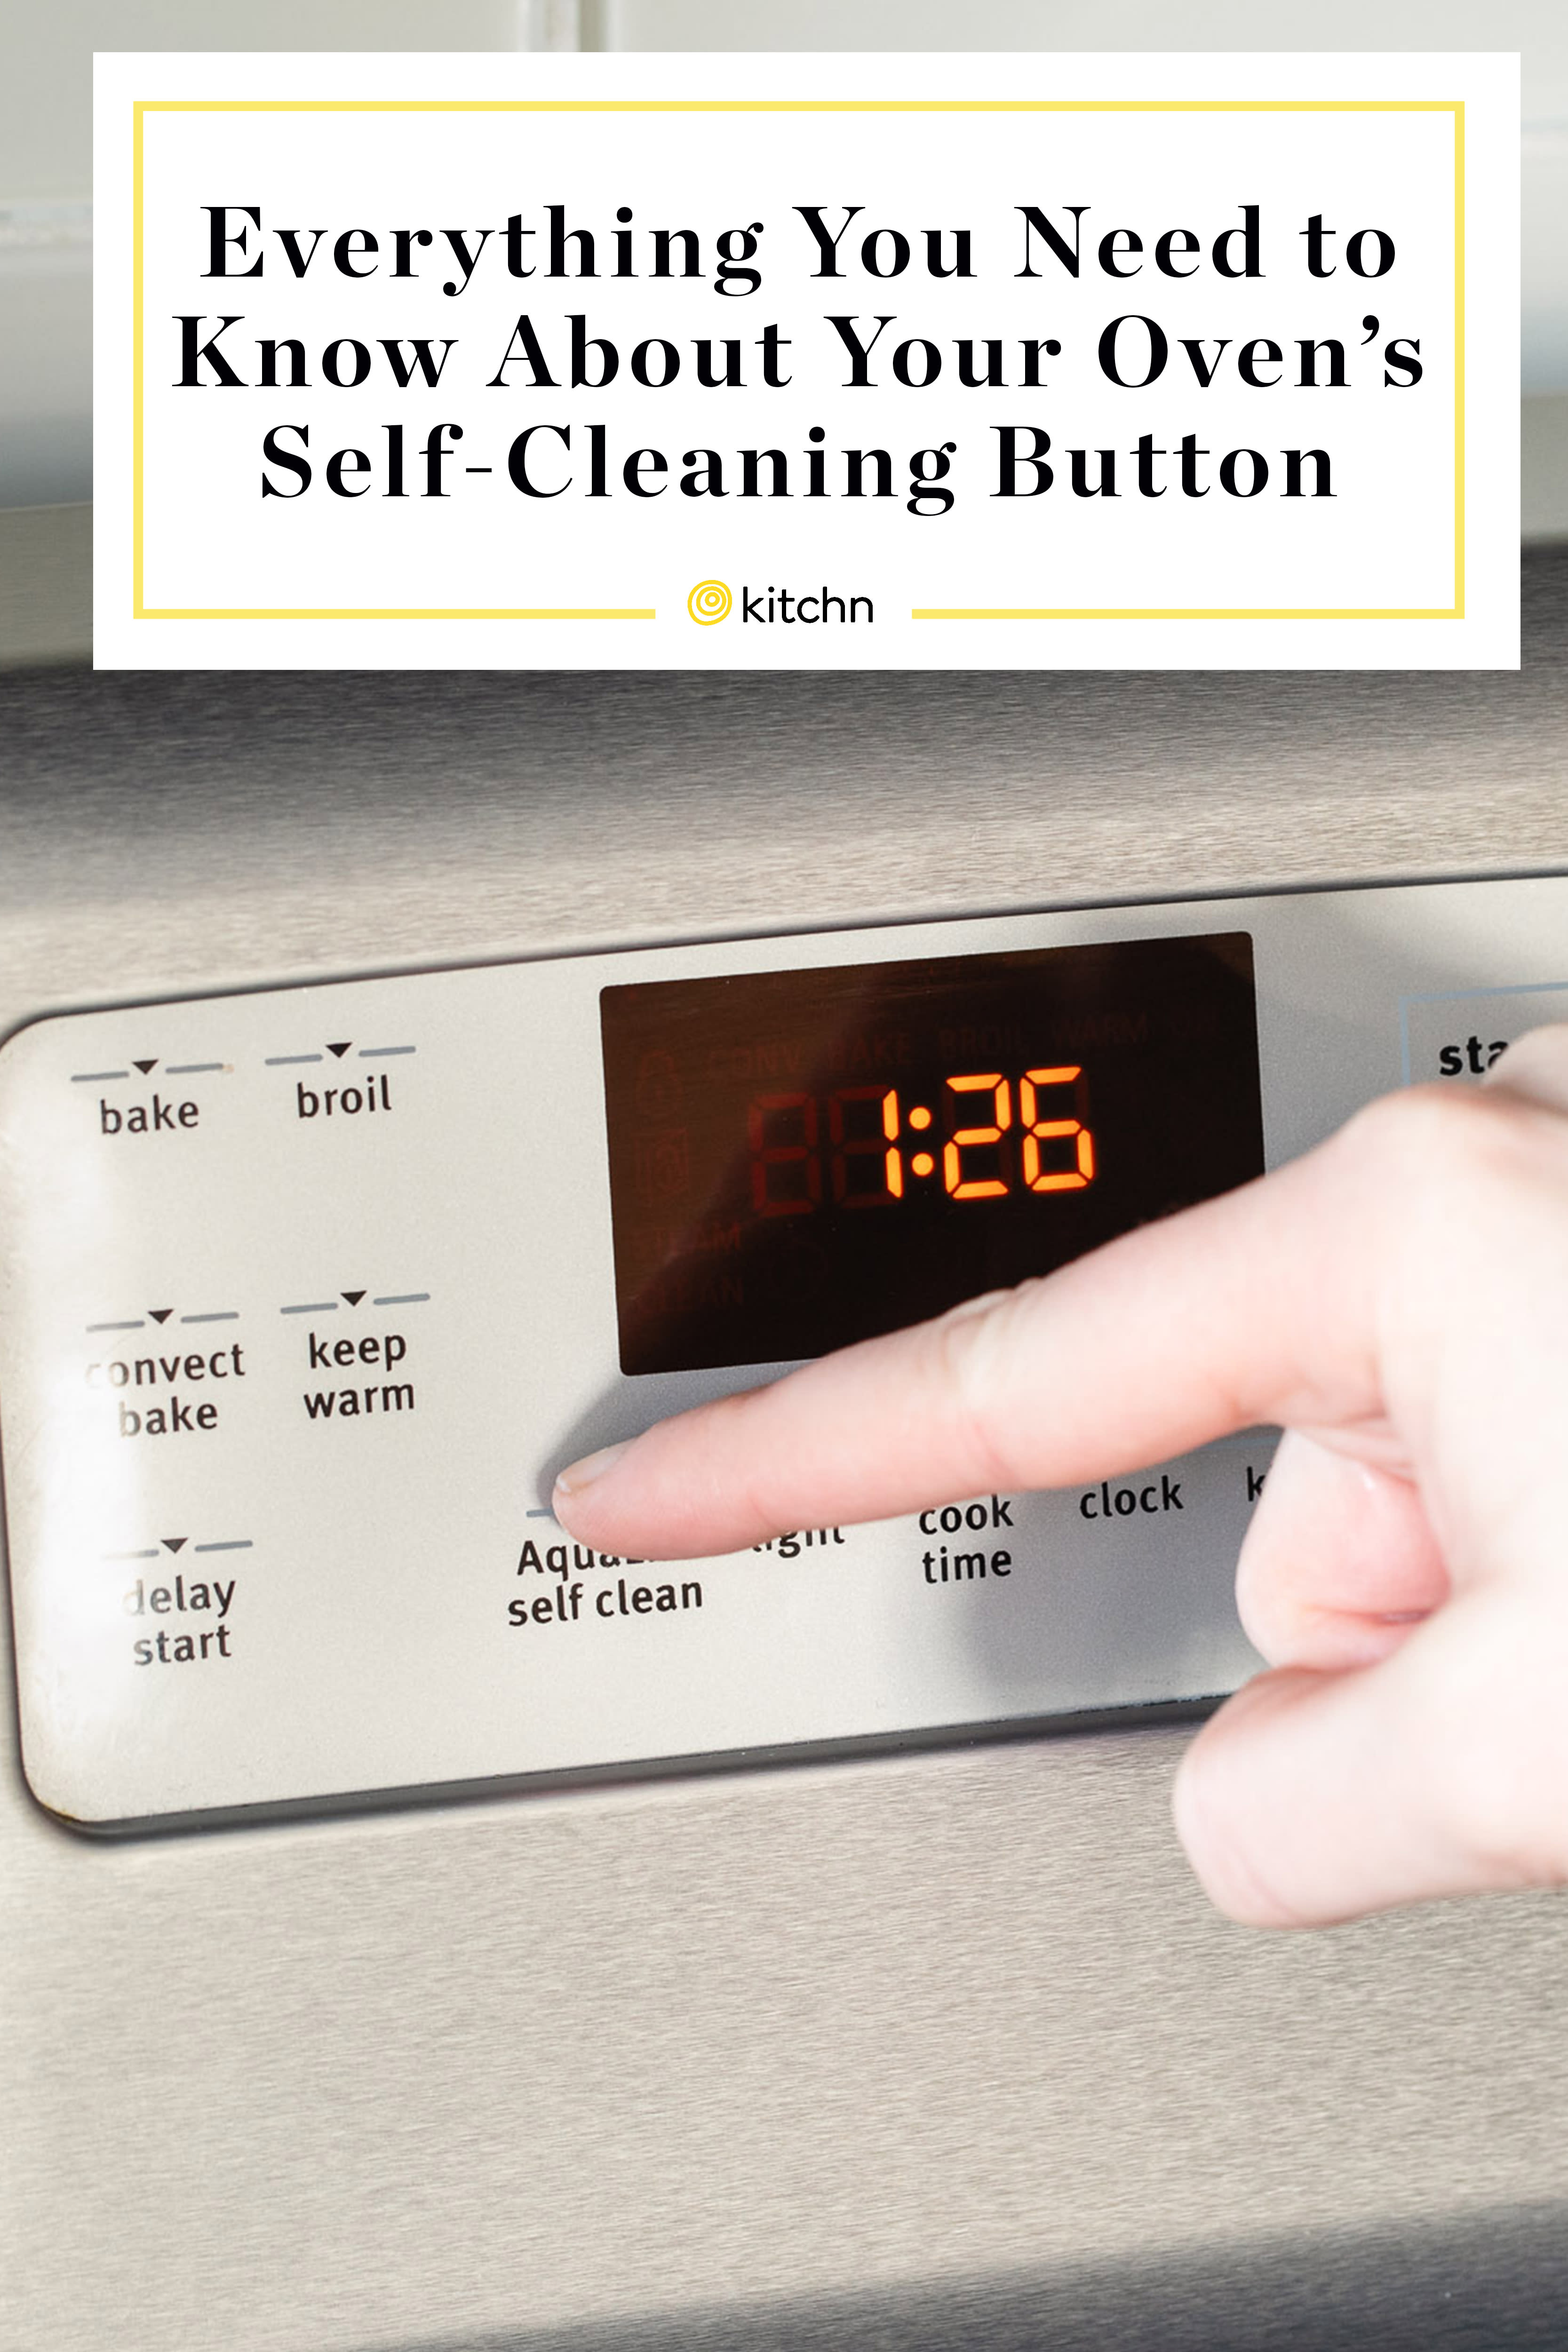 What does self-cleaning mean?